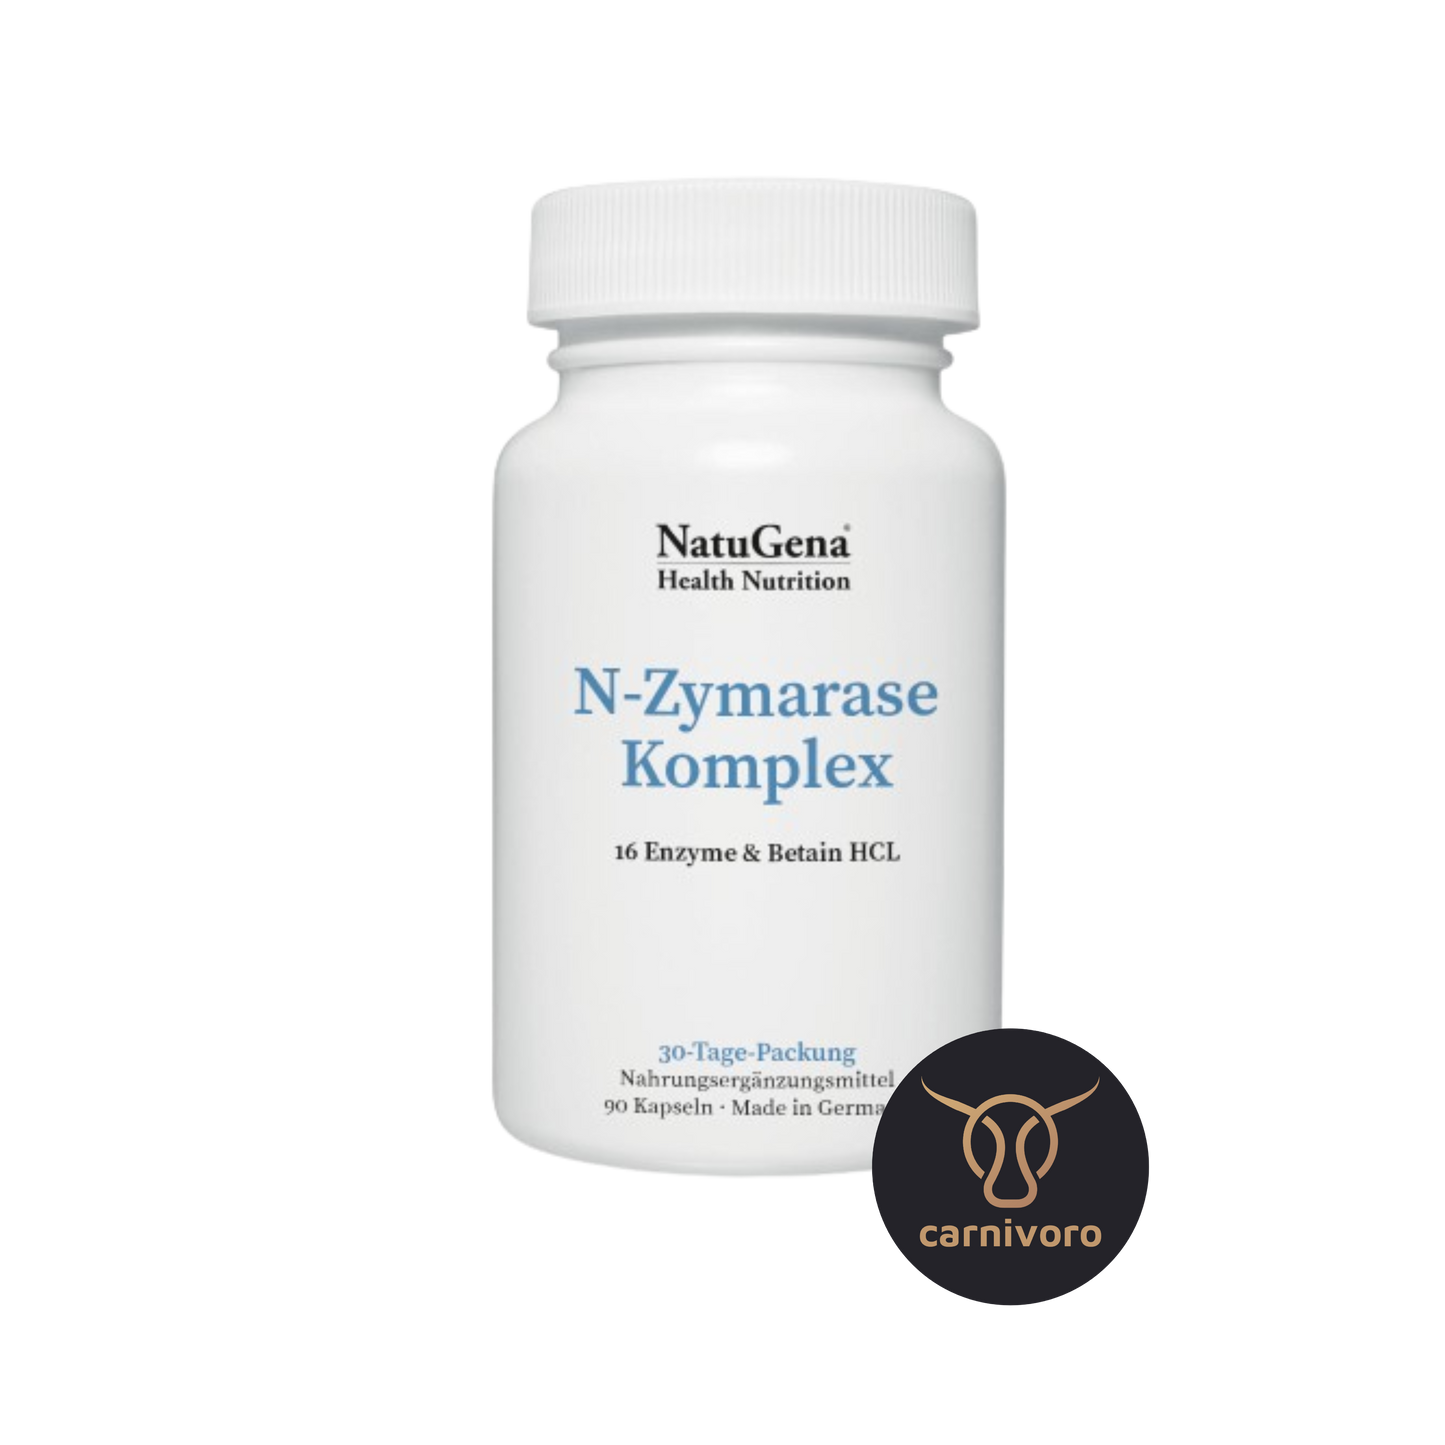 NatuGena» Complesso N-Zymarase 90 Capsule